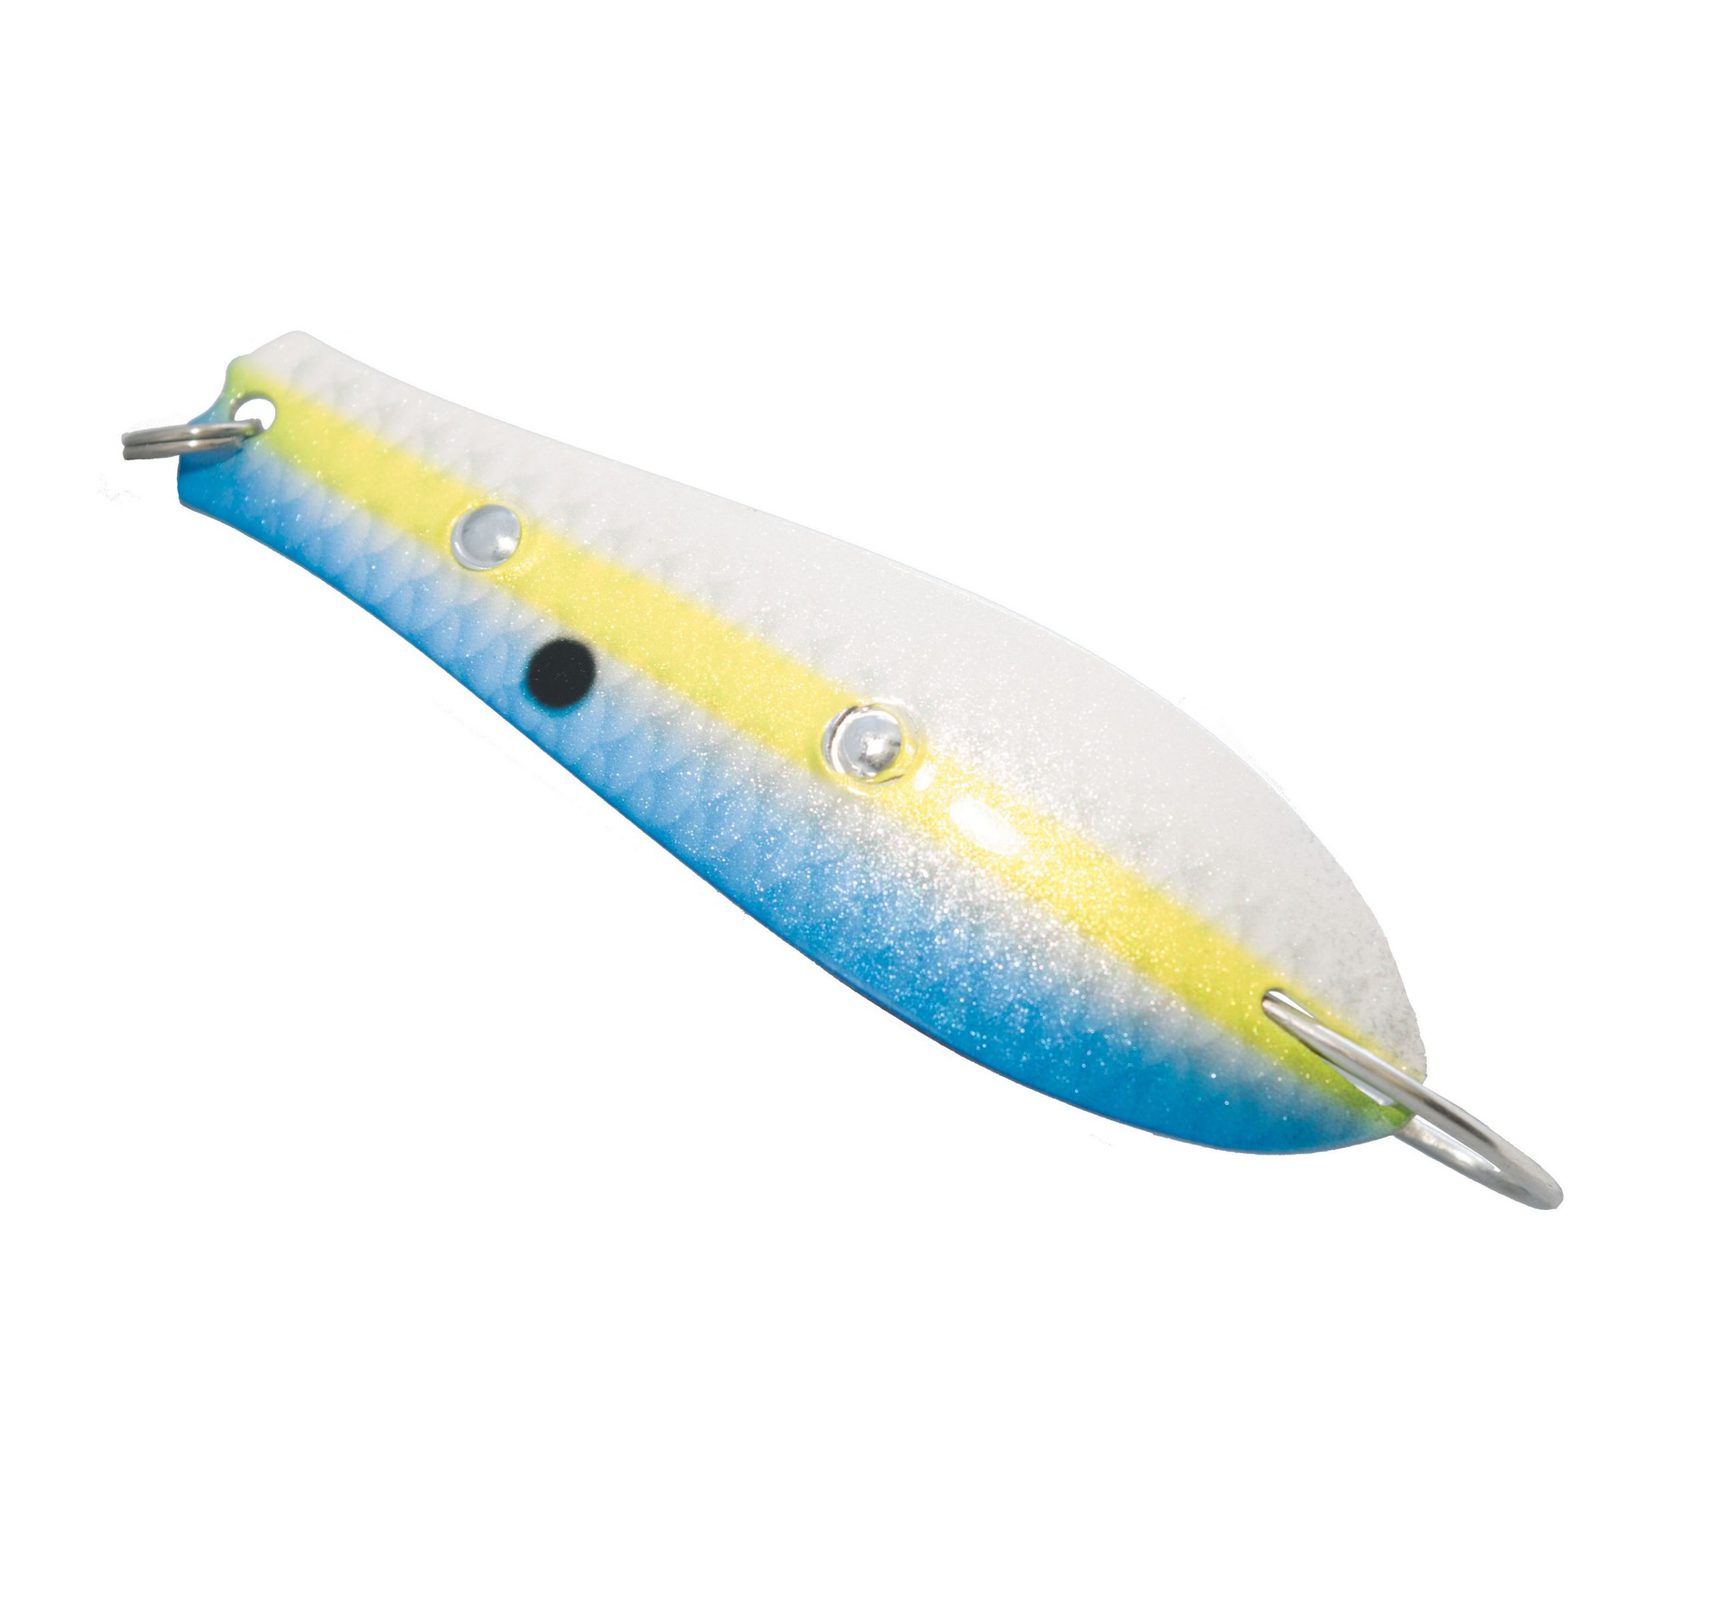 https://www.yellowbirdproducts.com/wp-content/uploads/2020/02/560-Sexy-Shad-scaled.jpg